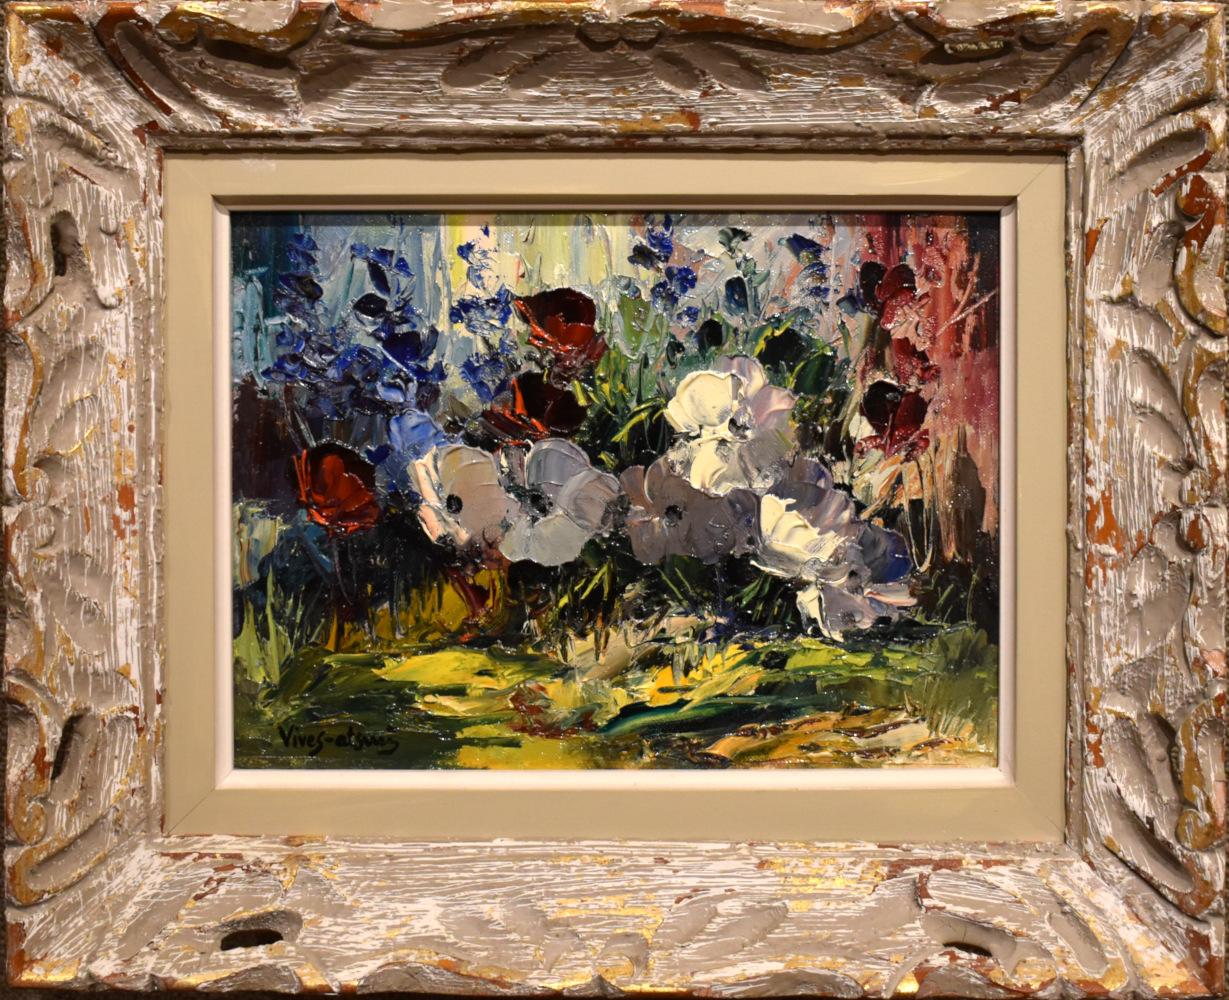 Jose Vives-Atsara Landscape Painting - "FLOWERS" DATED 1967. 14.5 X 17.5 FRAMED.  MASTER OF THE PALETTE KNIFE.